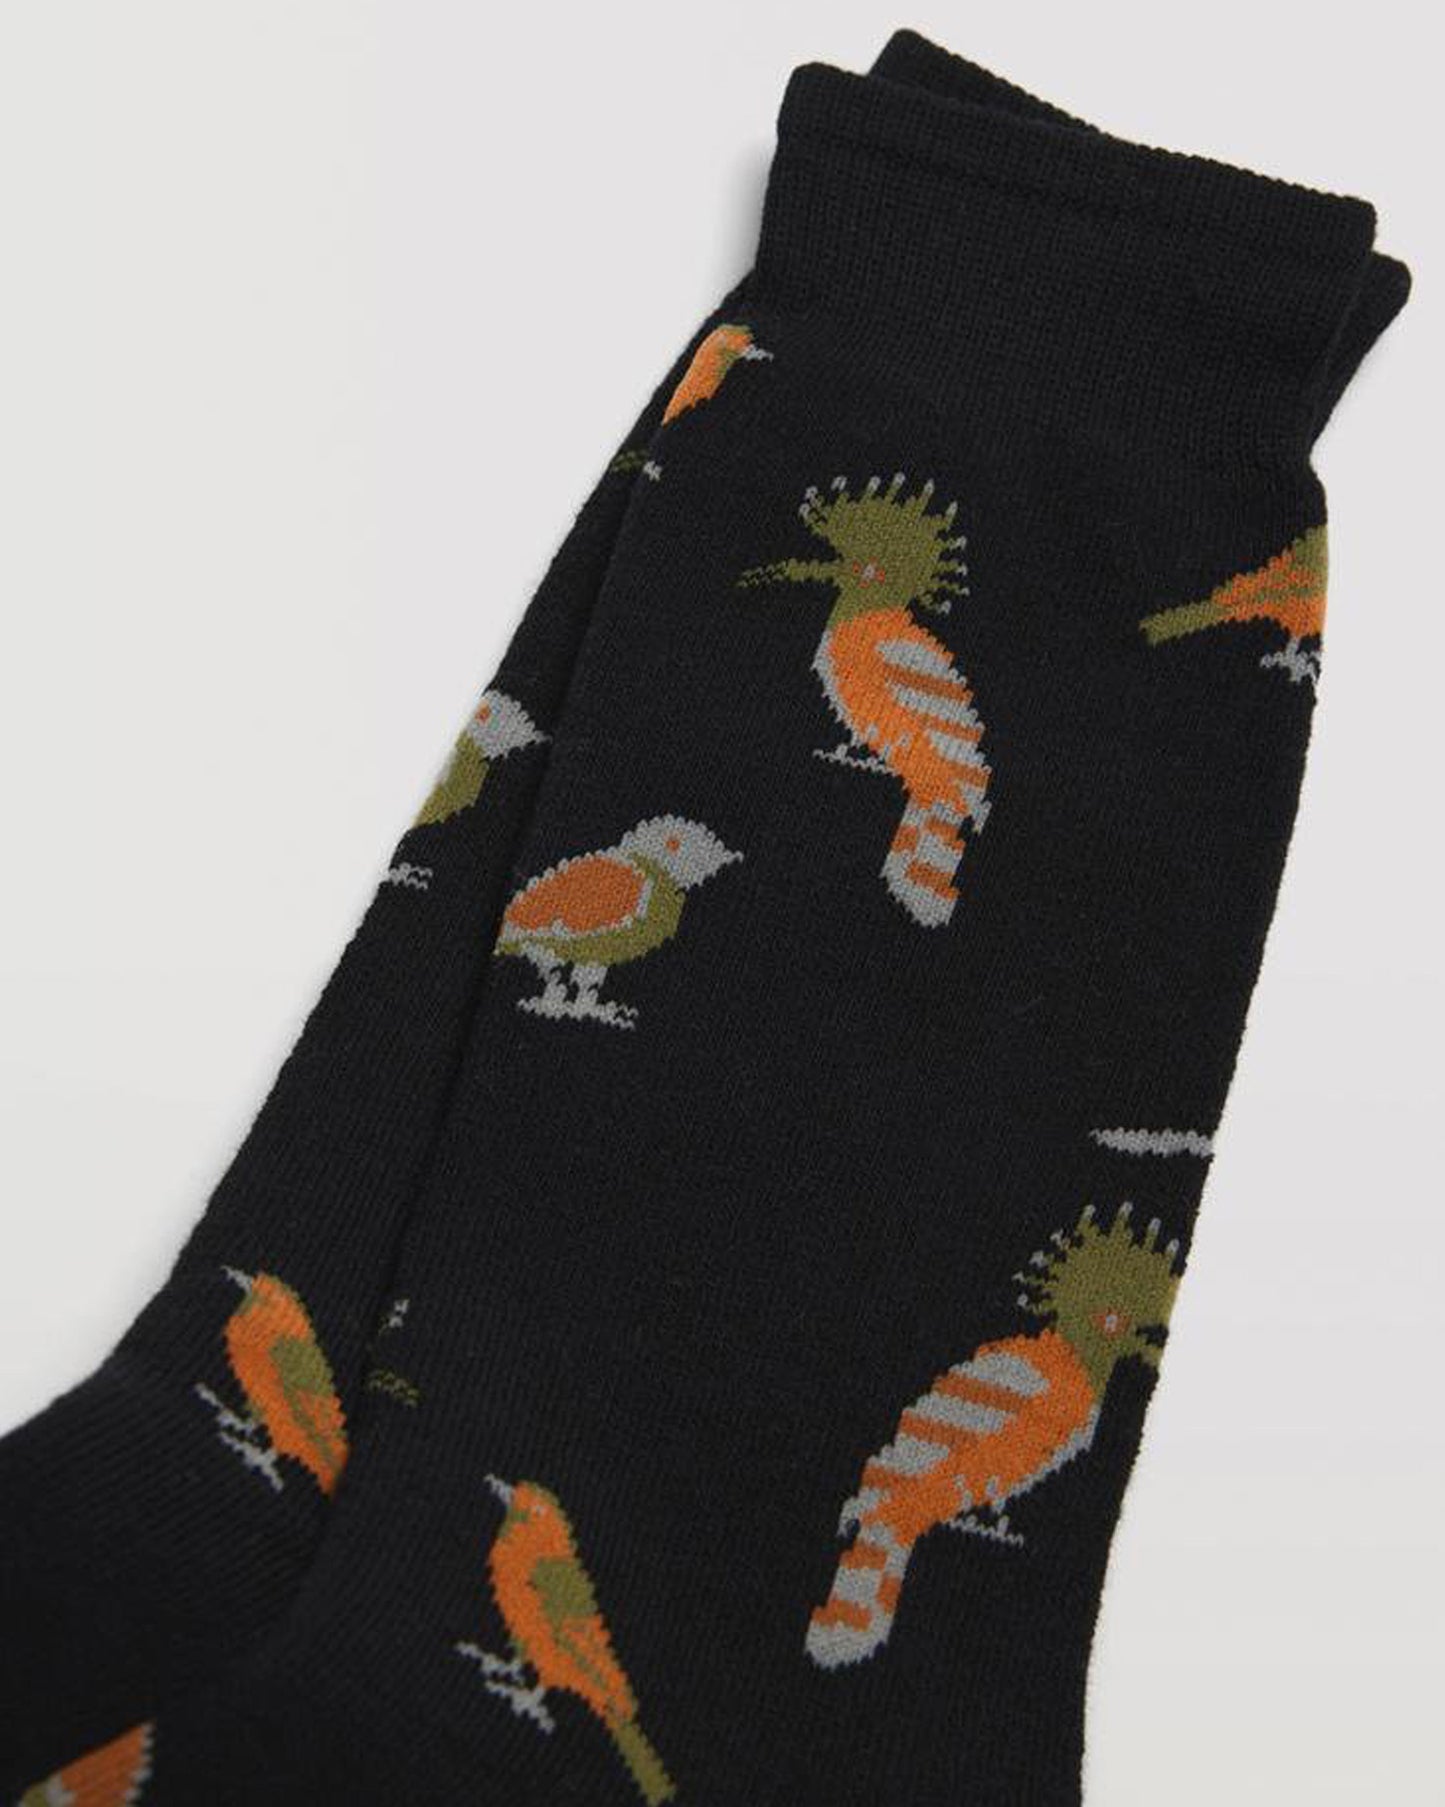 Ysabel Mora 22888 Bird Slipper Socks - Black thick and warm terry lined cotton mix crew length ankle socks with an all over exotic birds pattern in orange, khaki green and grey and deep elasticated comfort cuff.